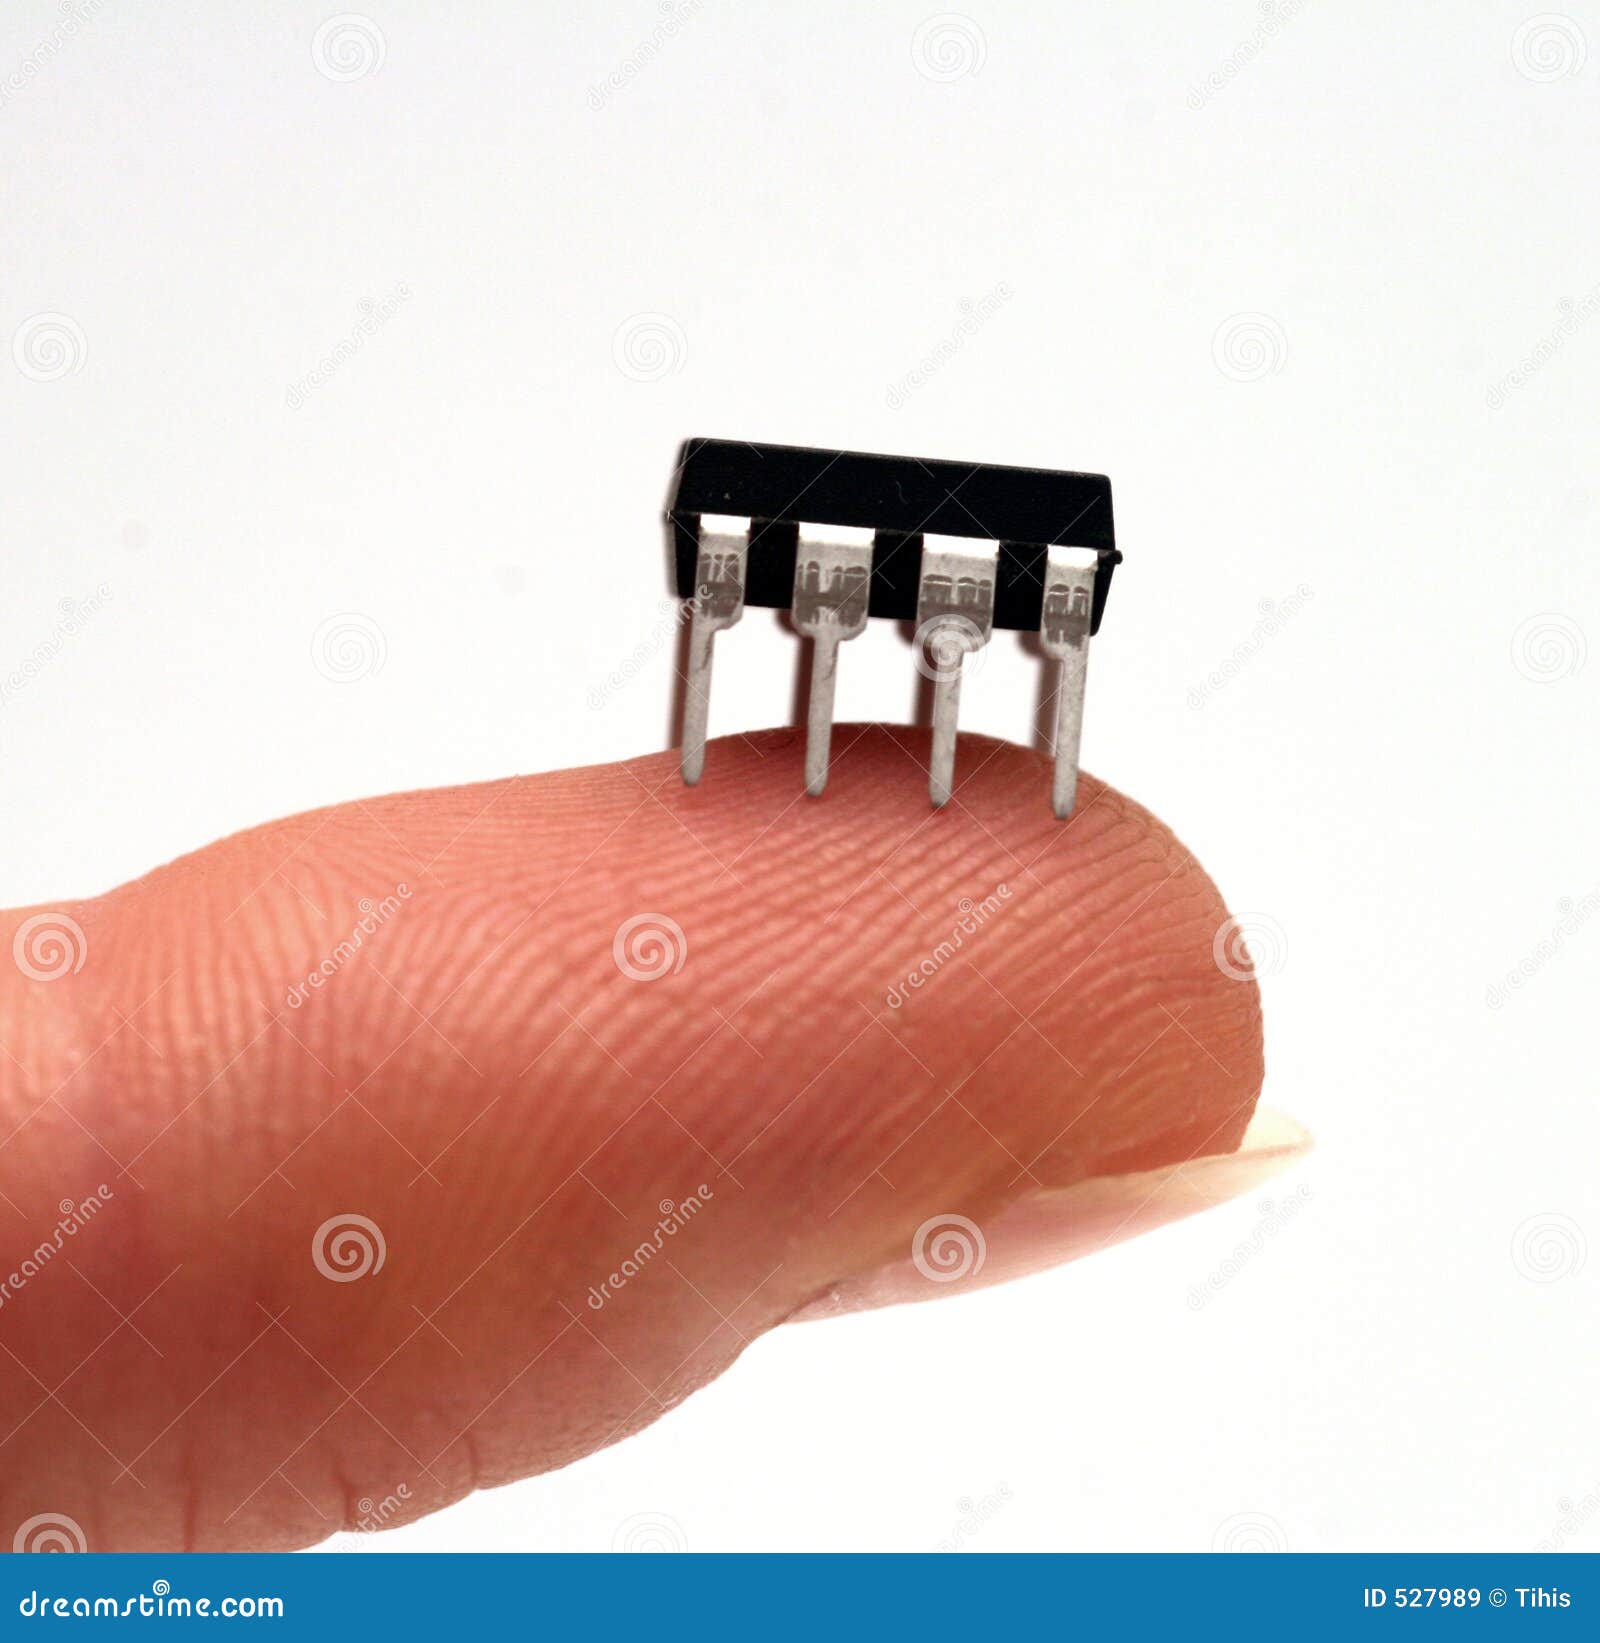 ic - integrated circuit